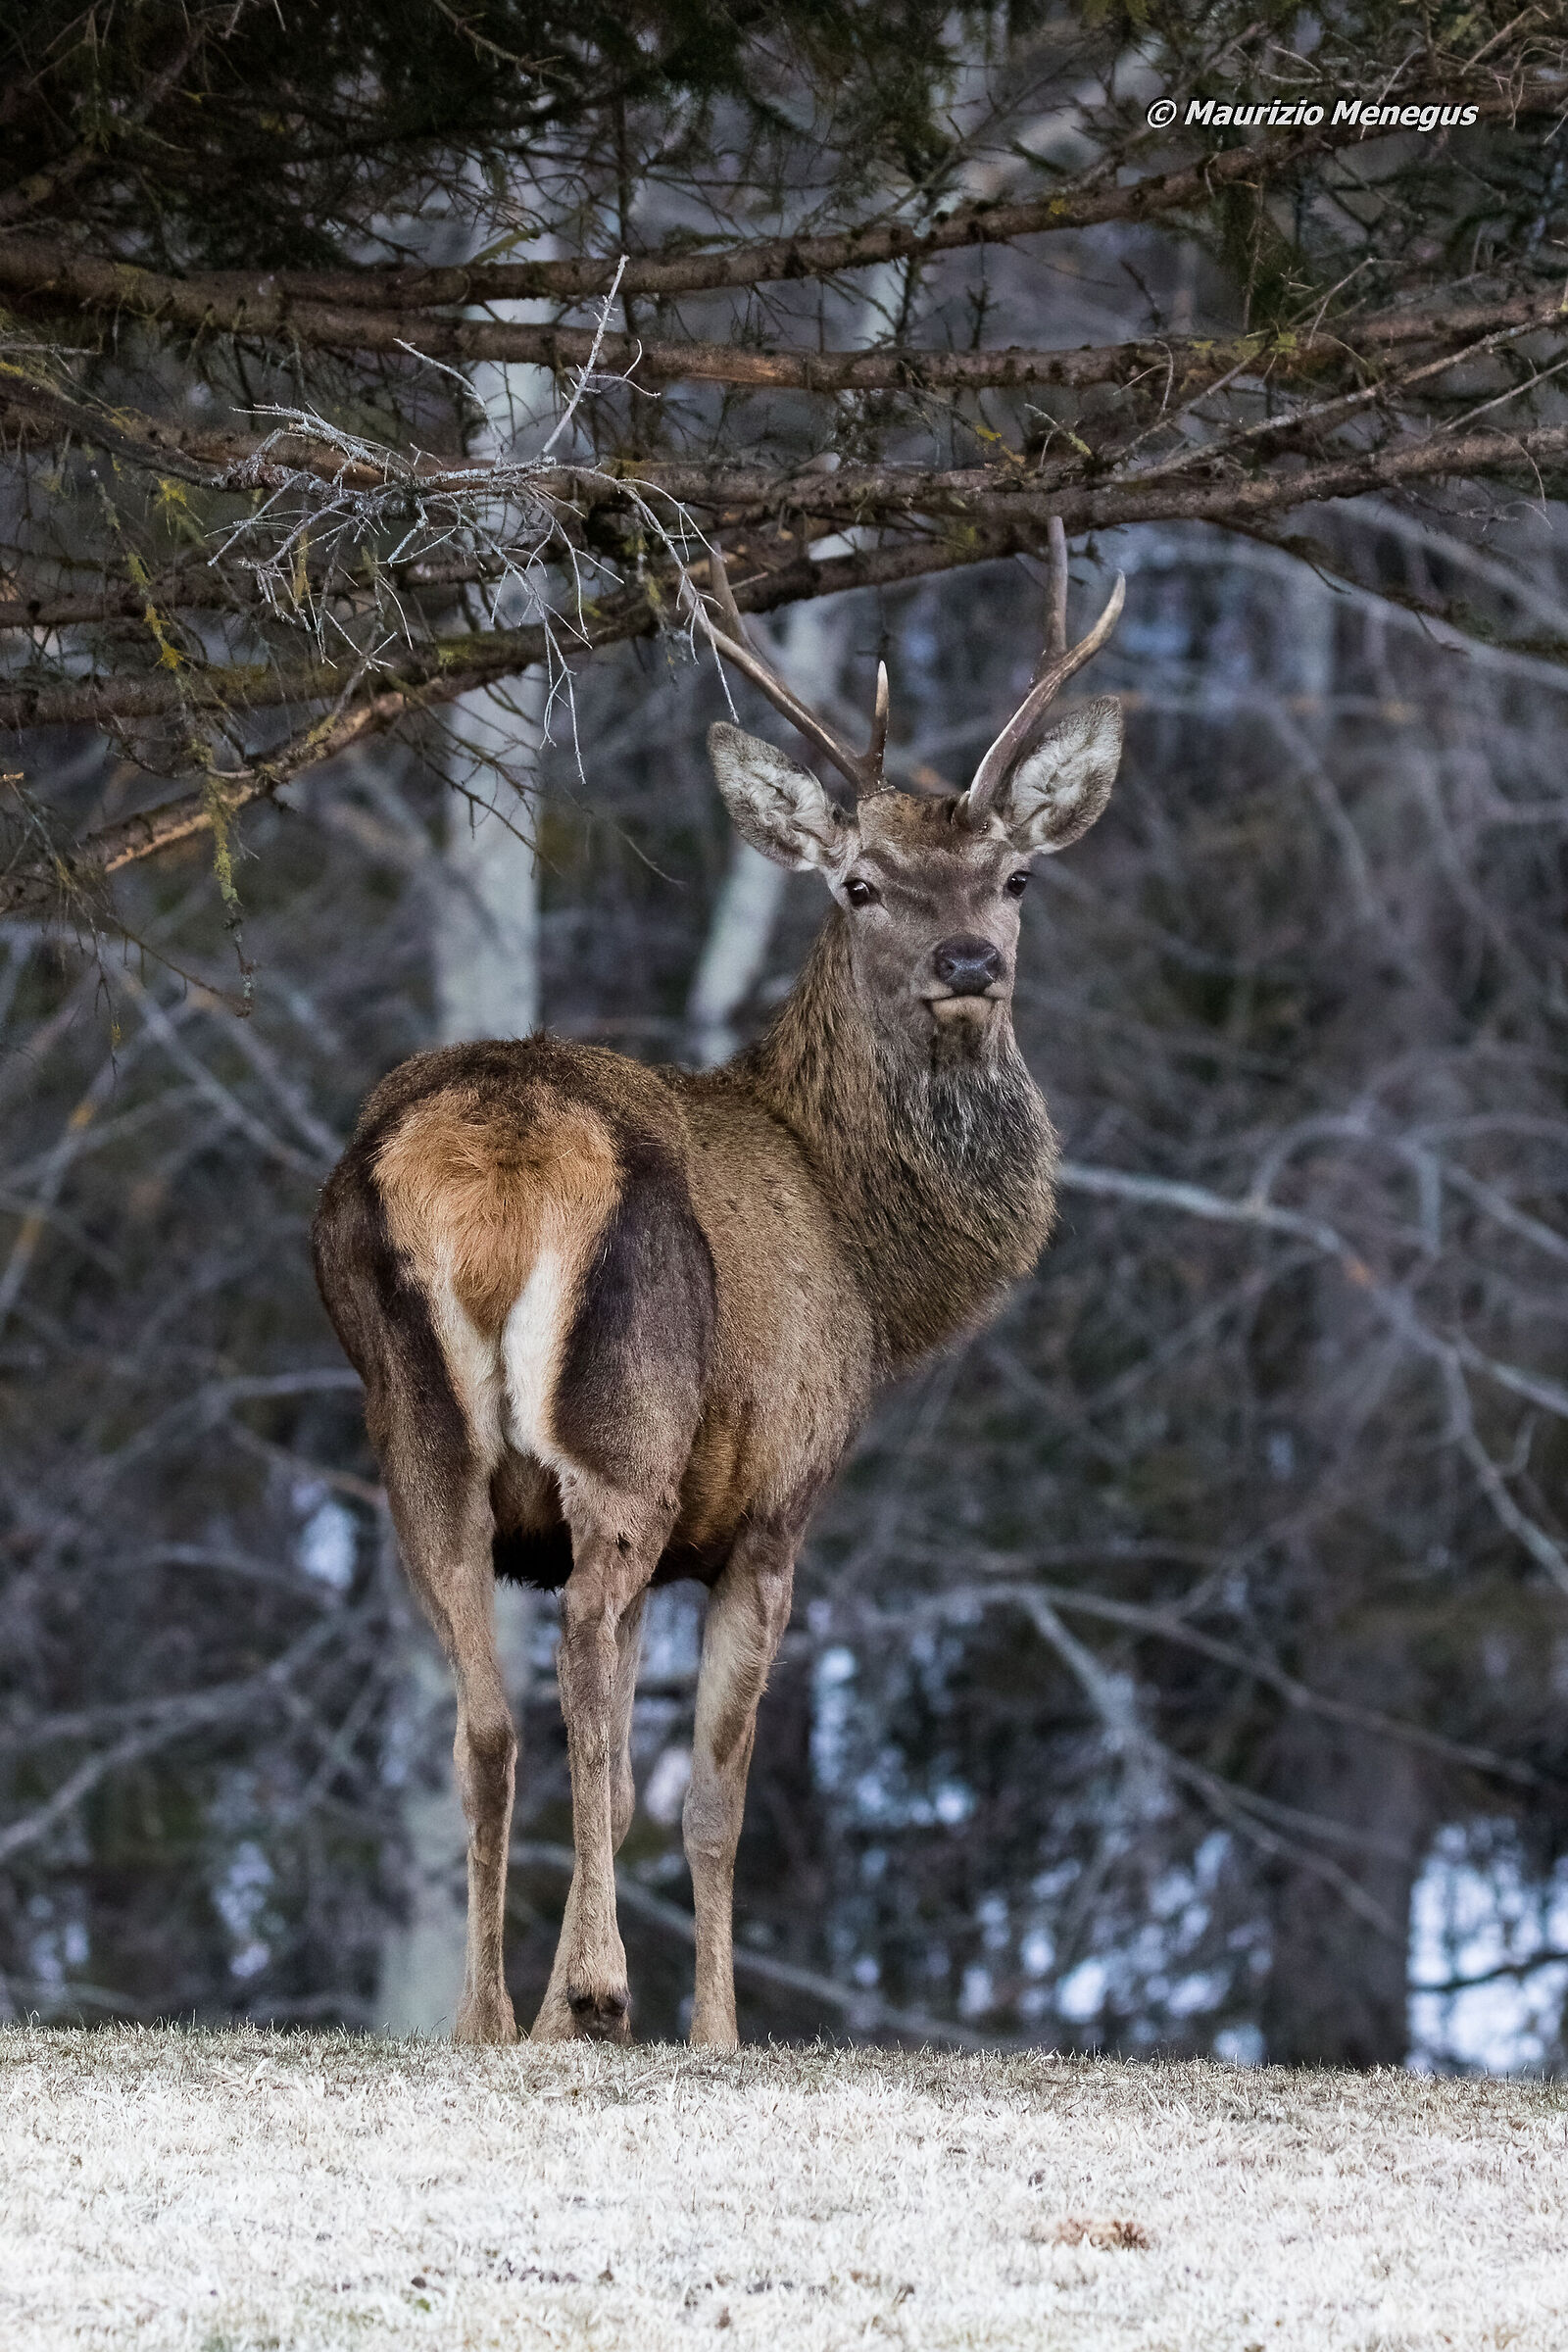 Young anomalous deer...